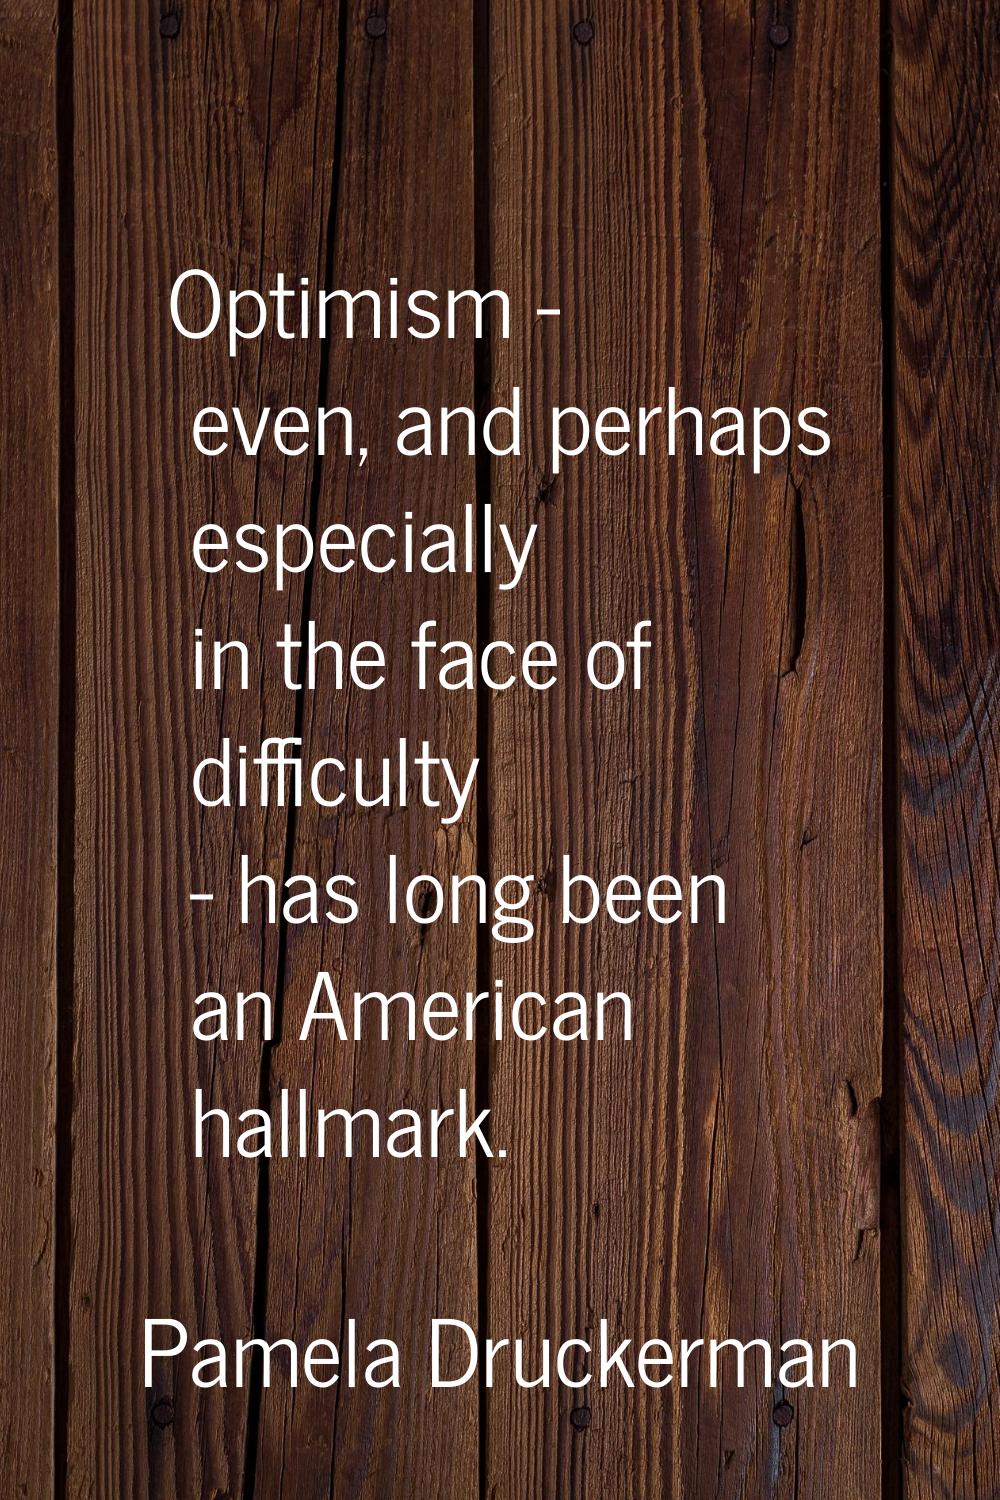 Optimism - even, and perhaps especially in the face of difficulty - has long been an American hallm